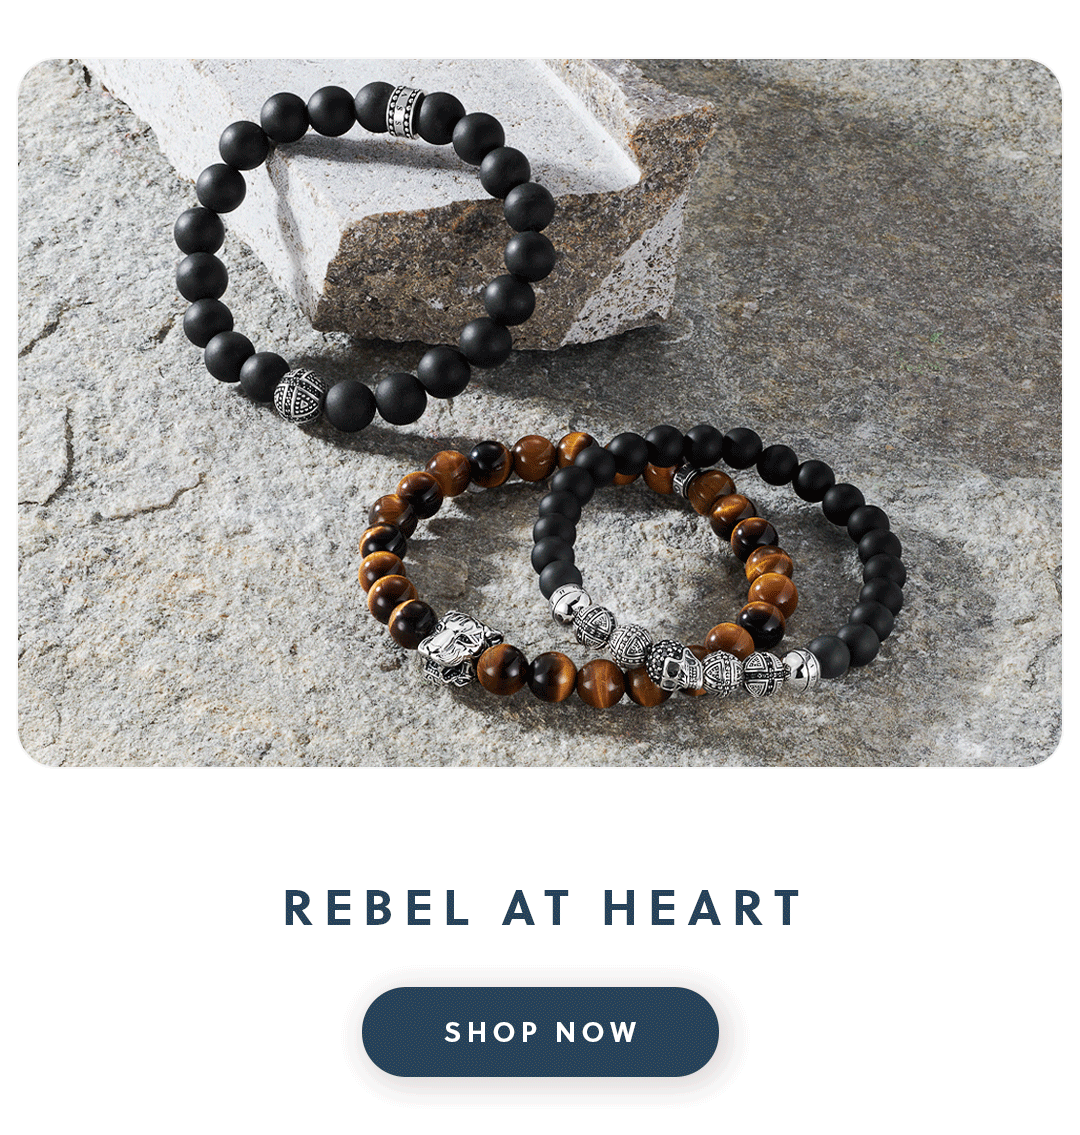 Three Thomas Sabo beaded bracelets with text rebel at heart shop now